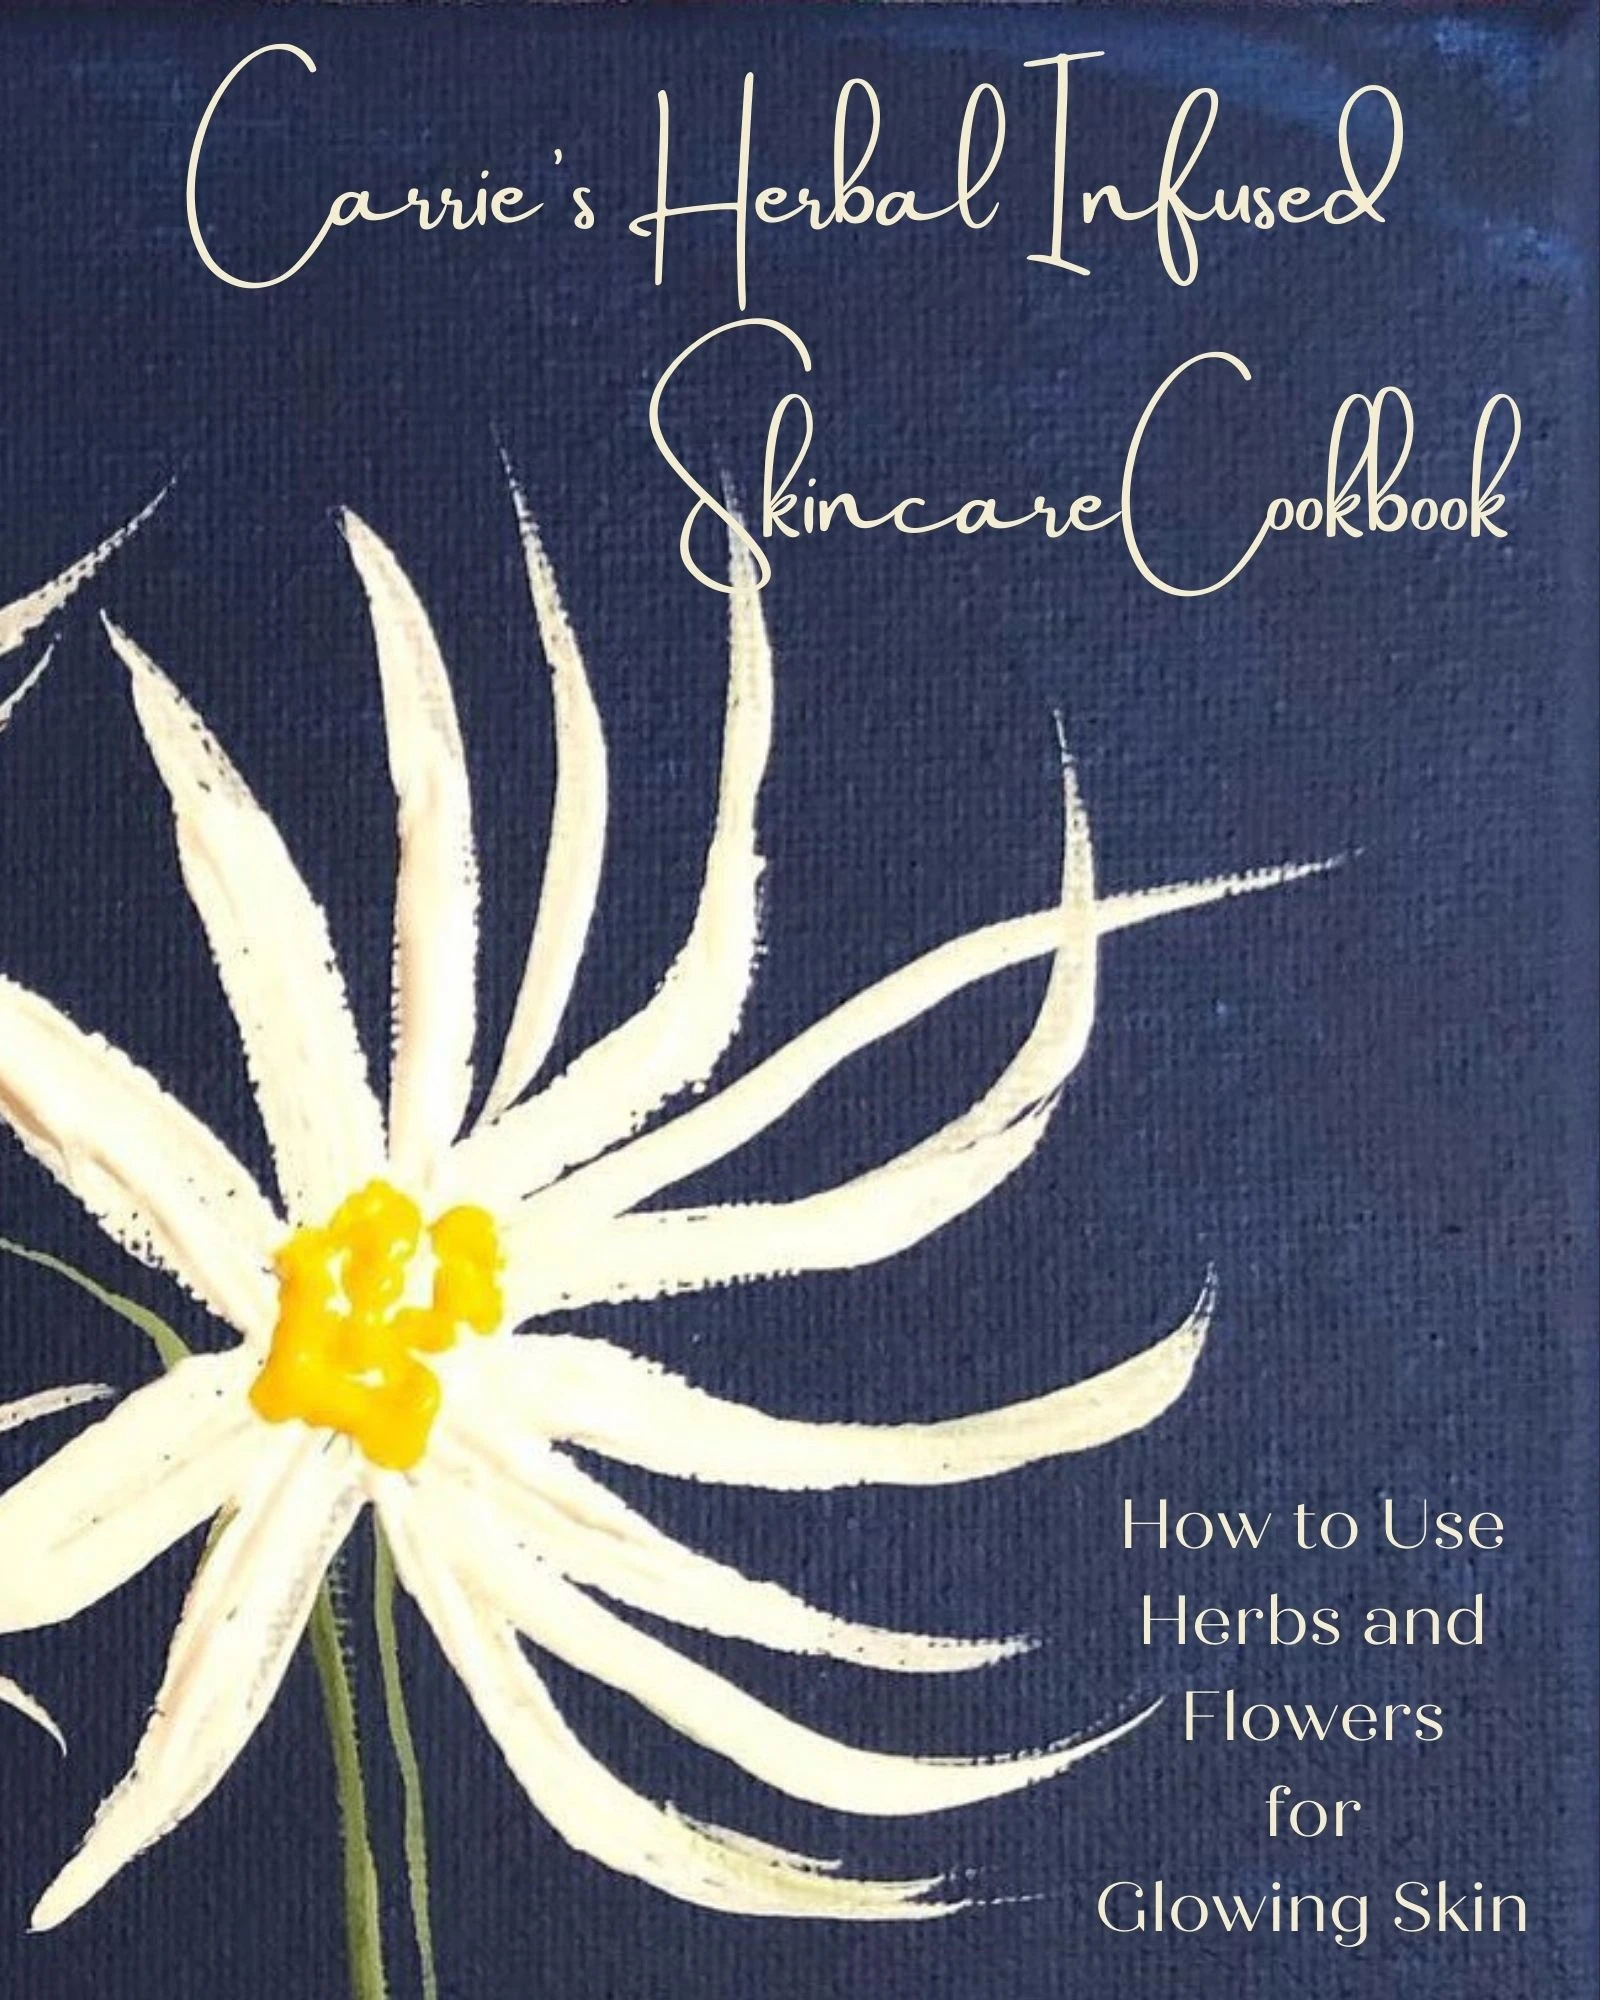 Carrie’s Herbal Infused Skincare Cookbook: How to Use Herbs and Flowers for Glowing Skin